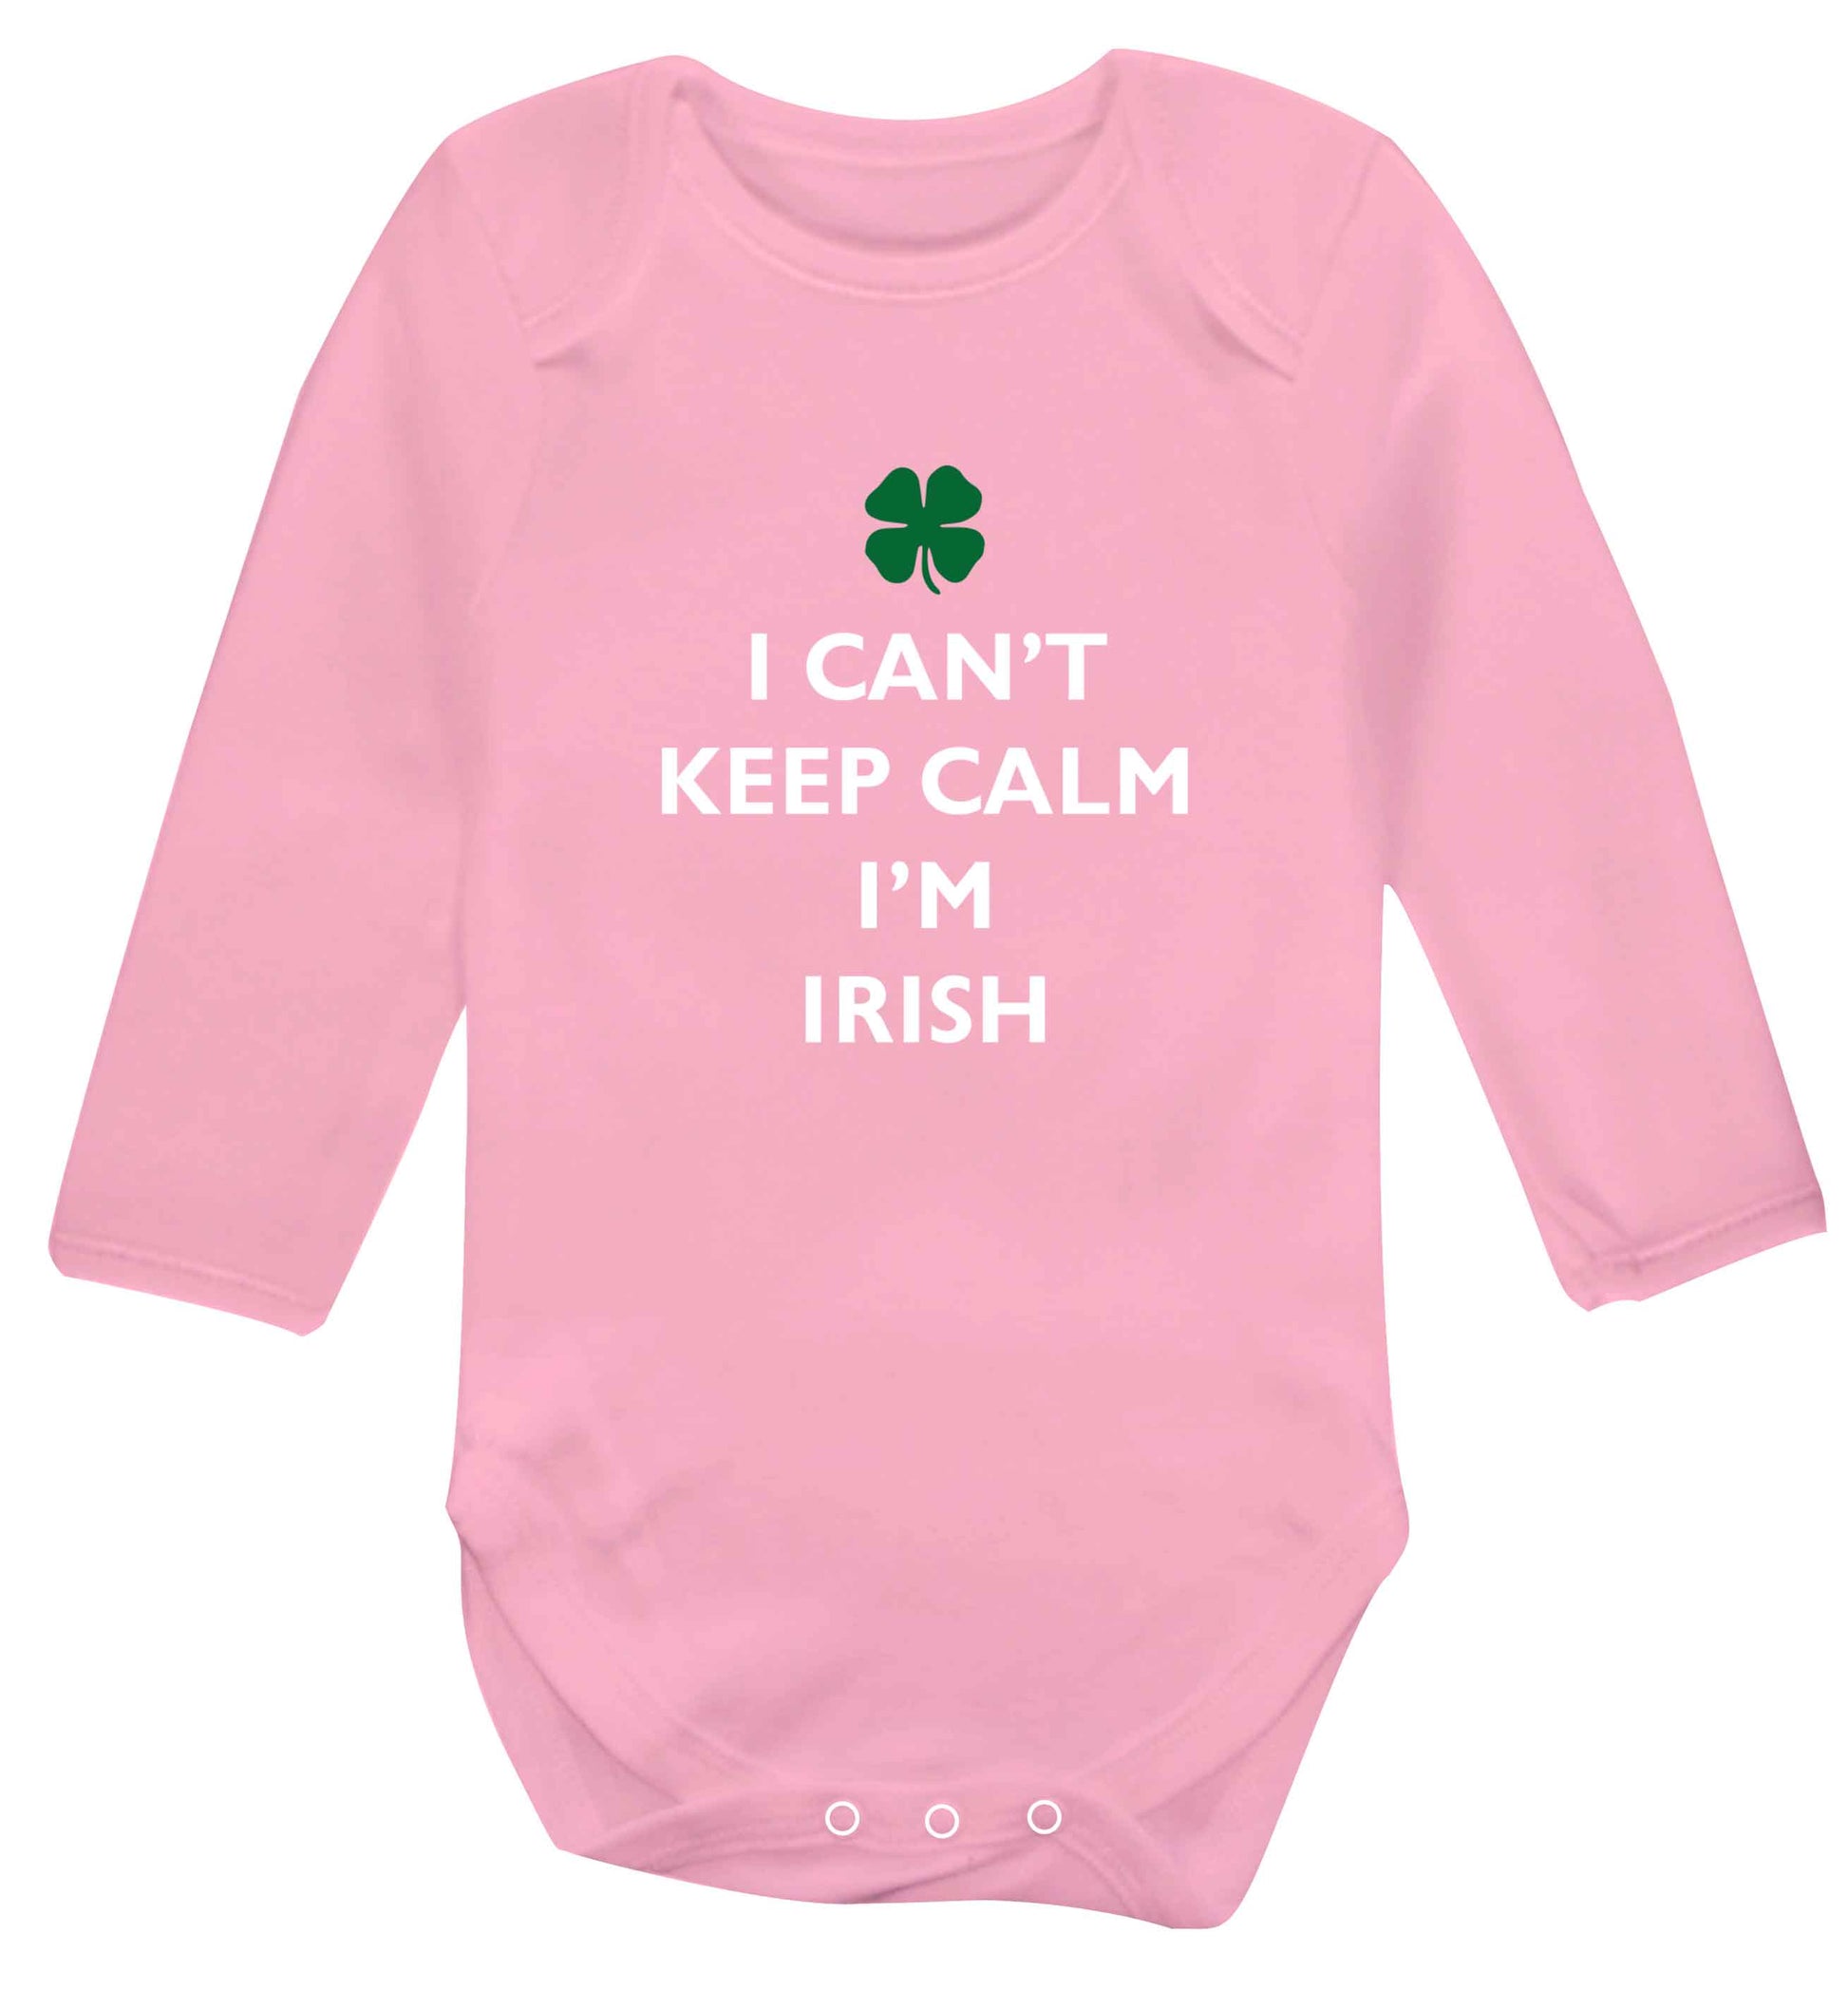 I can't keep calm I'm Irish baby vest long sleeved pale pink 6-12 months